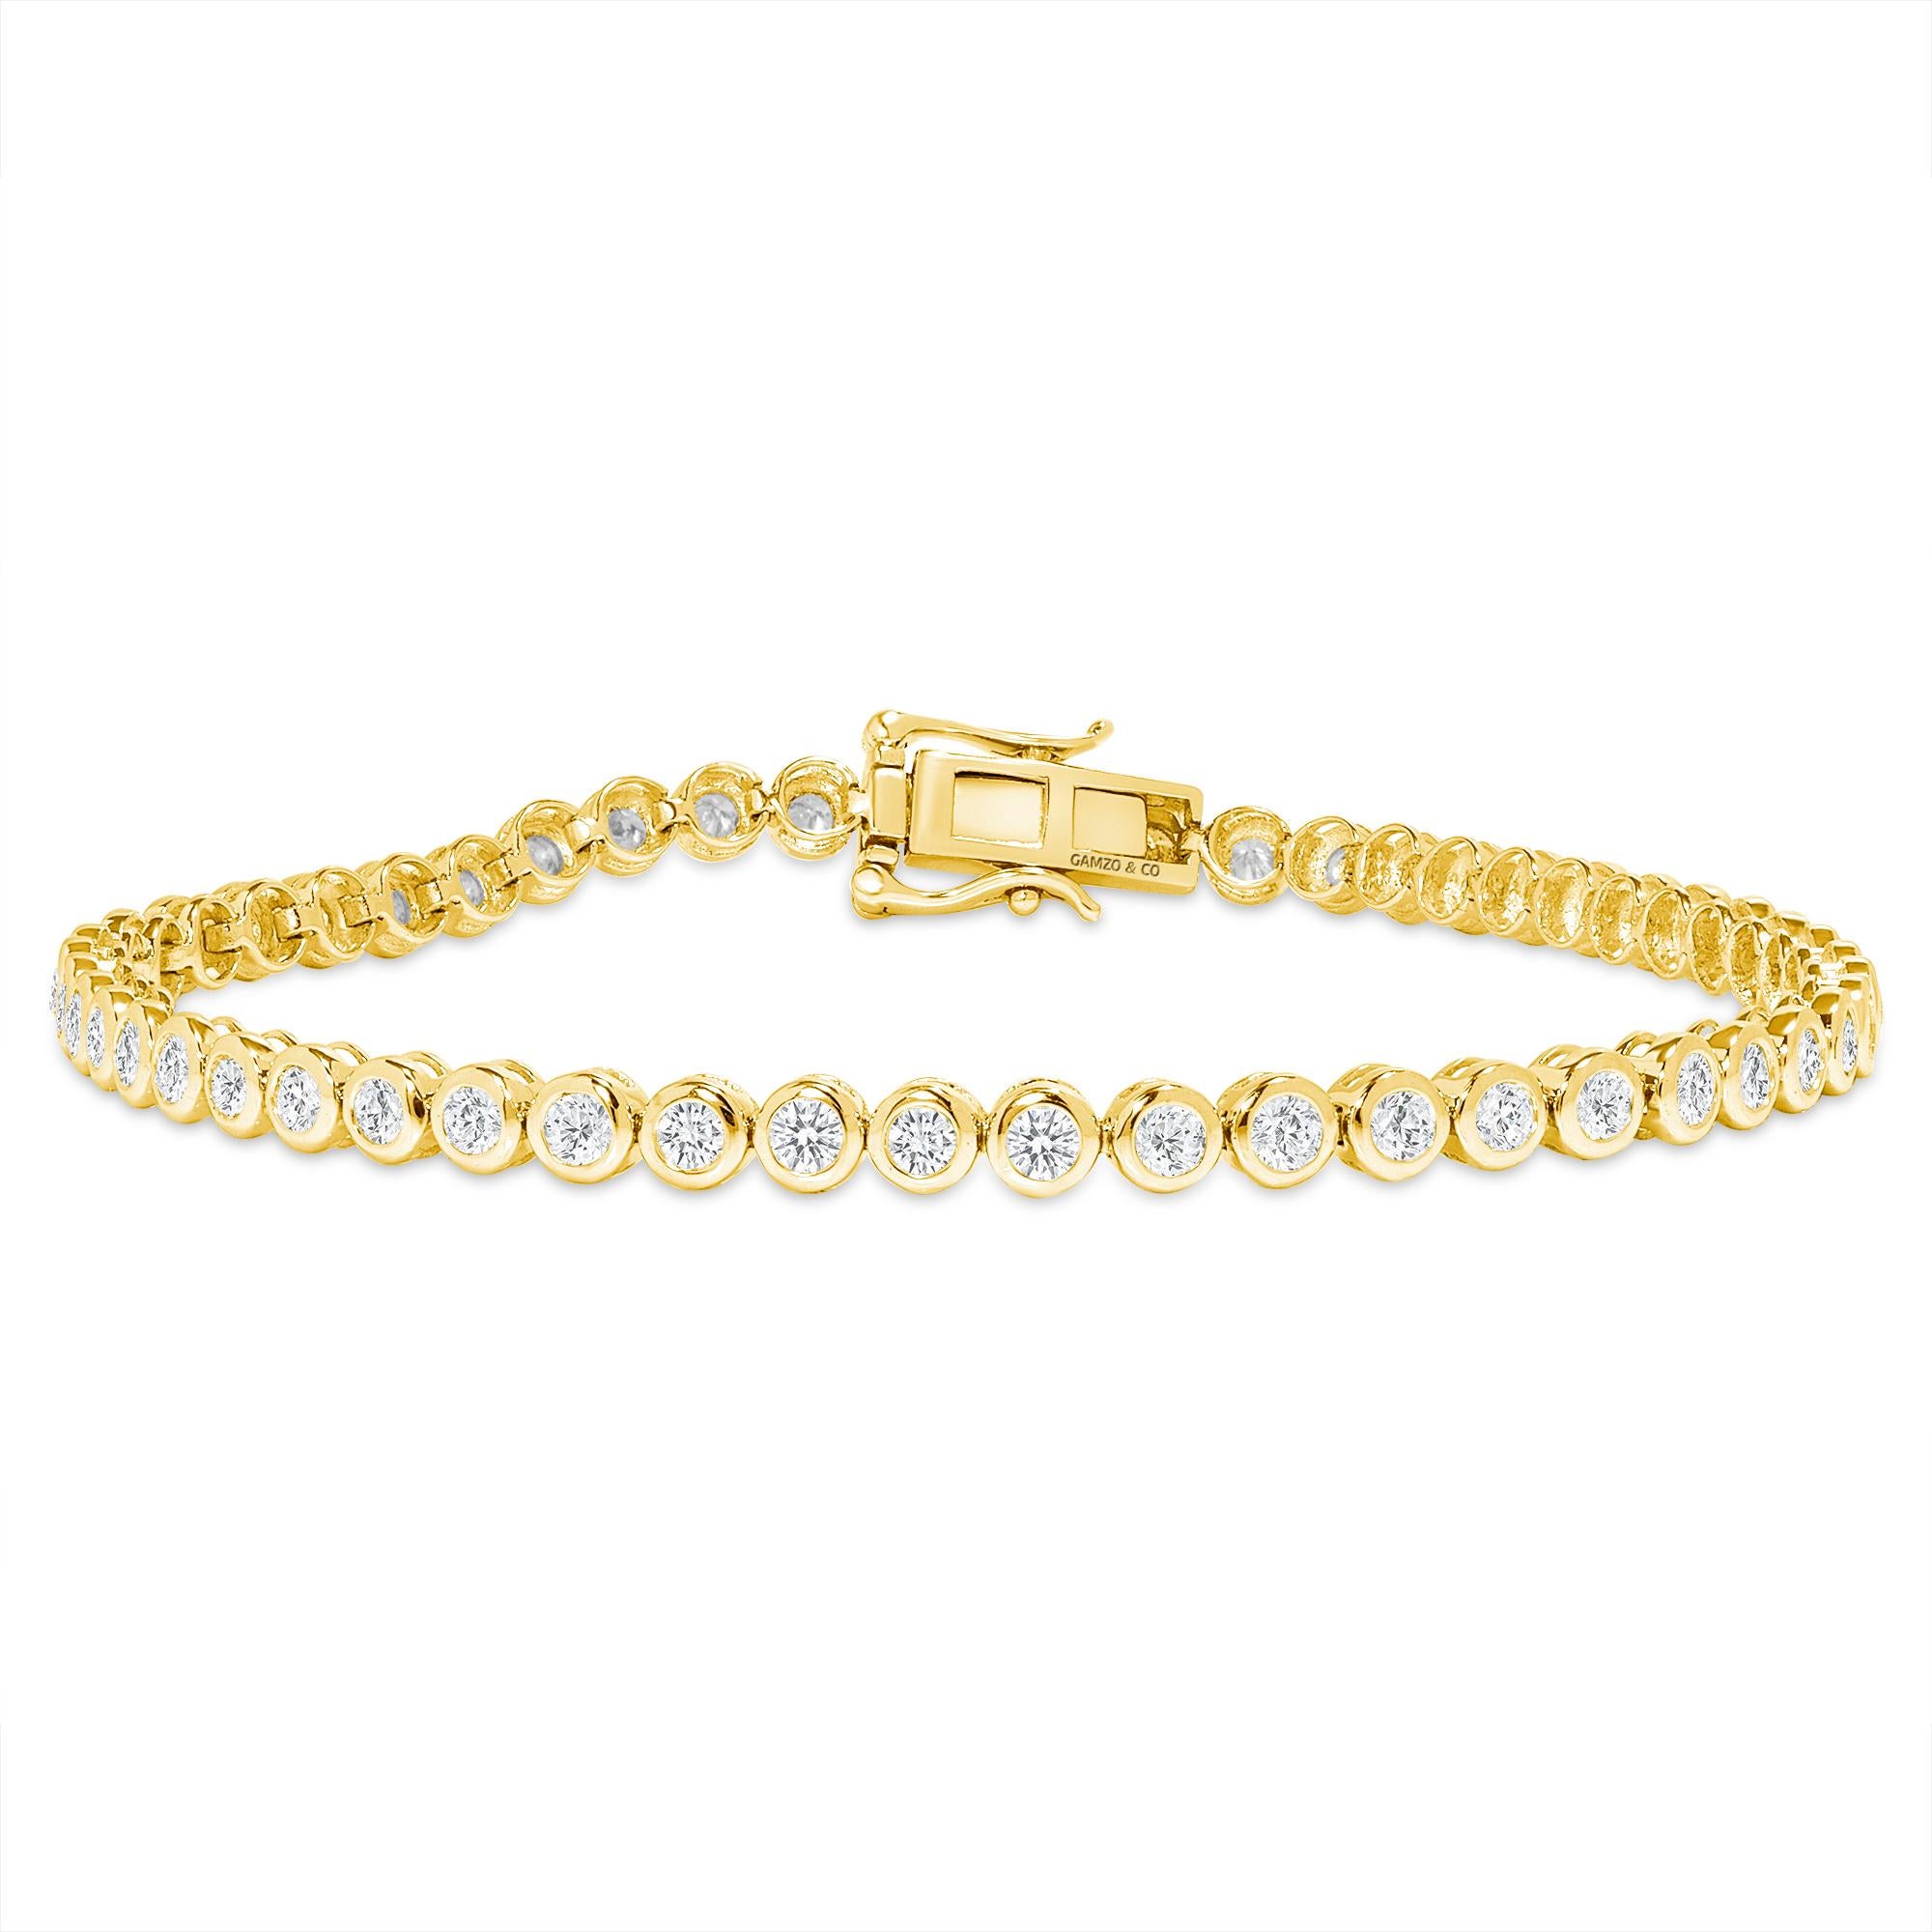 These beautiful round diamonds dance around your wrist as they absorb light and attention.
Metal: 14k Gold
Diamond Cut: Round
Diamond Total Carats: 5ct
Diamond Clarity: VS
Diamond Color: F
Color: Yellow Gold
Bracelet Length: 8.5 Inches 
Included